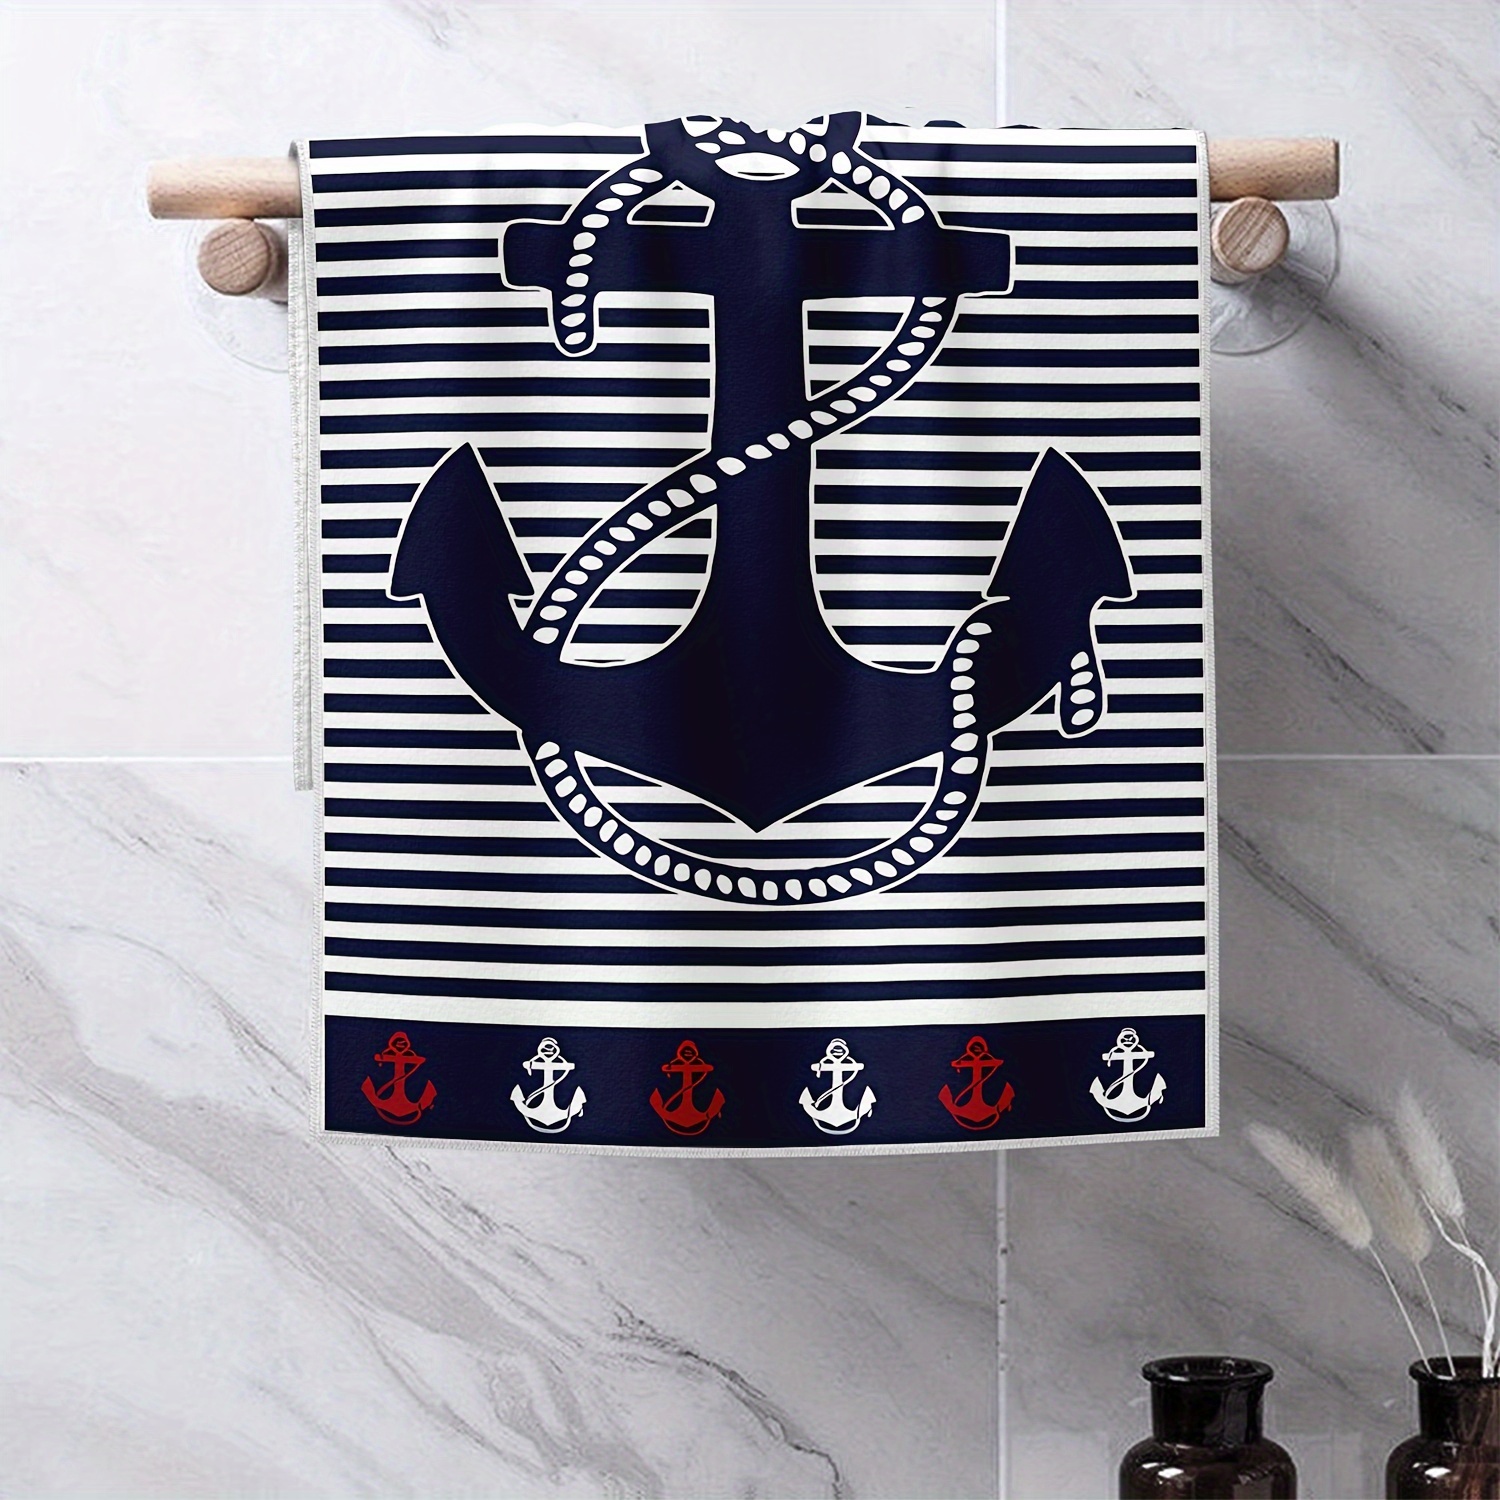 

2-piece Coastal Anchor Kitchen Towels - Ultrafine Microfiber, Machine Washable, Contemporary Style Dish Cloths For Home Decor & Cleaning